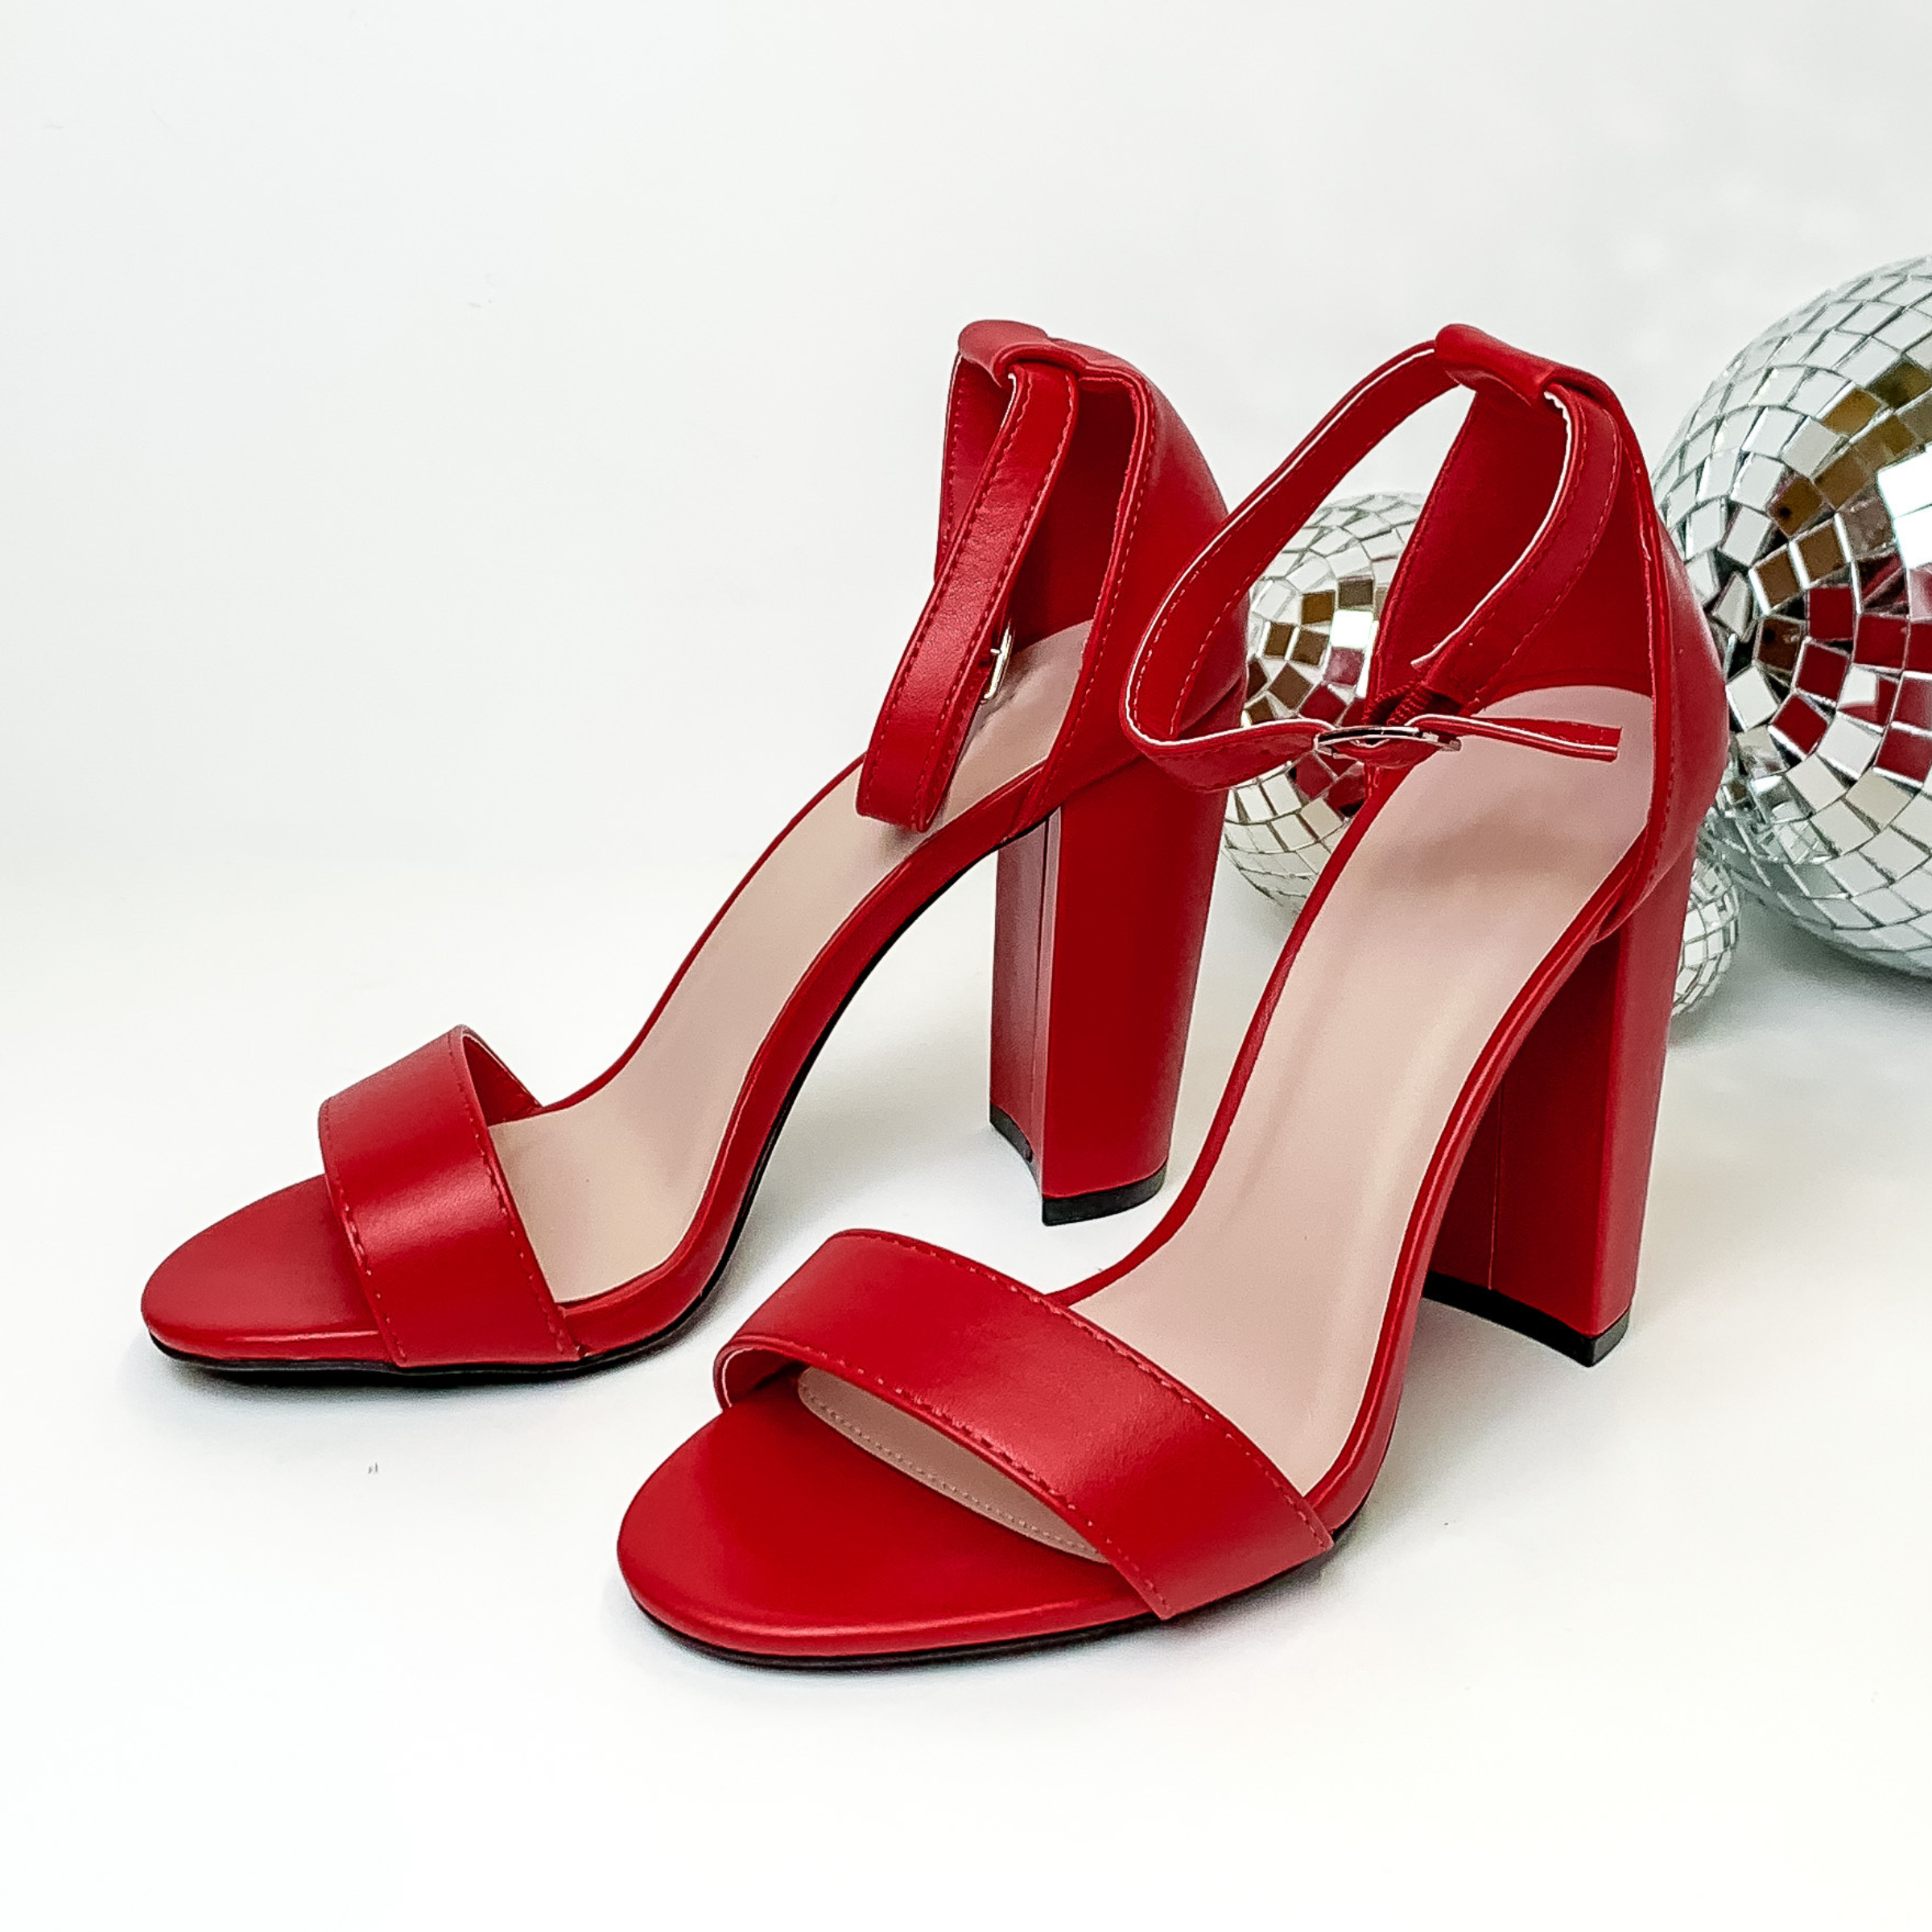 Red, block high heel sandals with an adjustable strap. These heels are pictured on a white background with disco balls on the right side of the heels. 